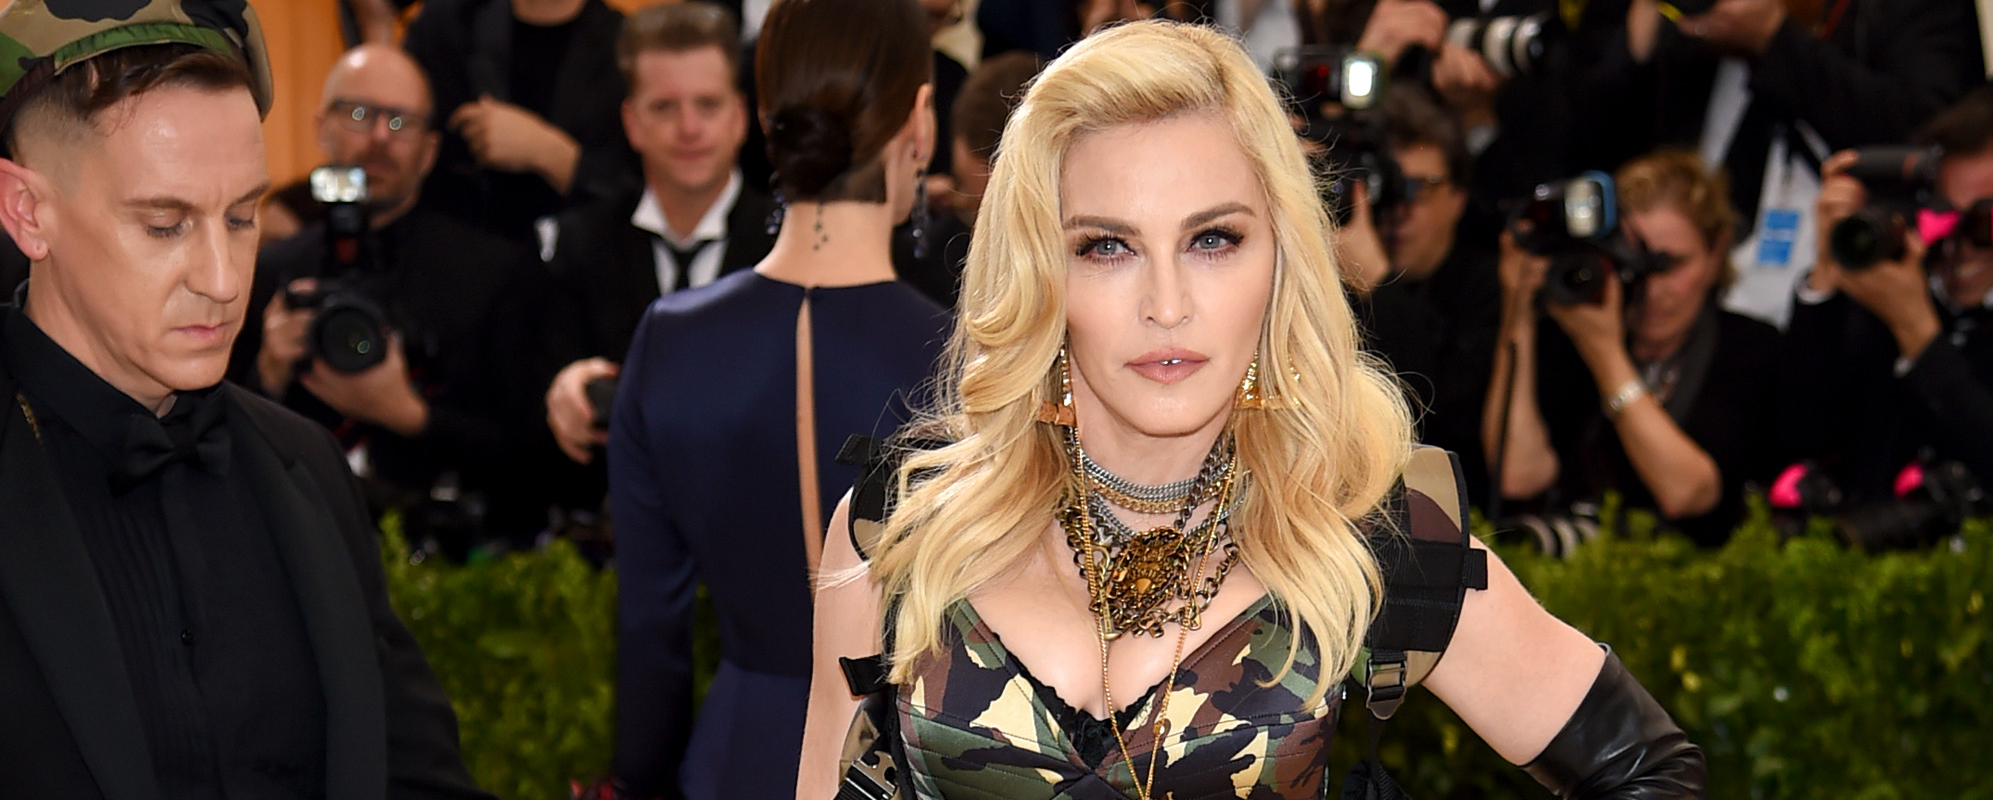 Fan in Wheelchair Called Out by Madonna Responds To Viral Backlash